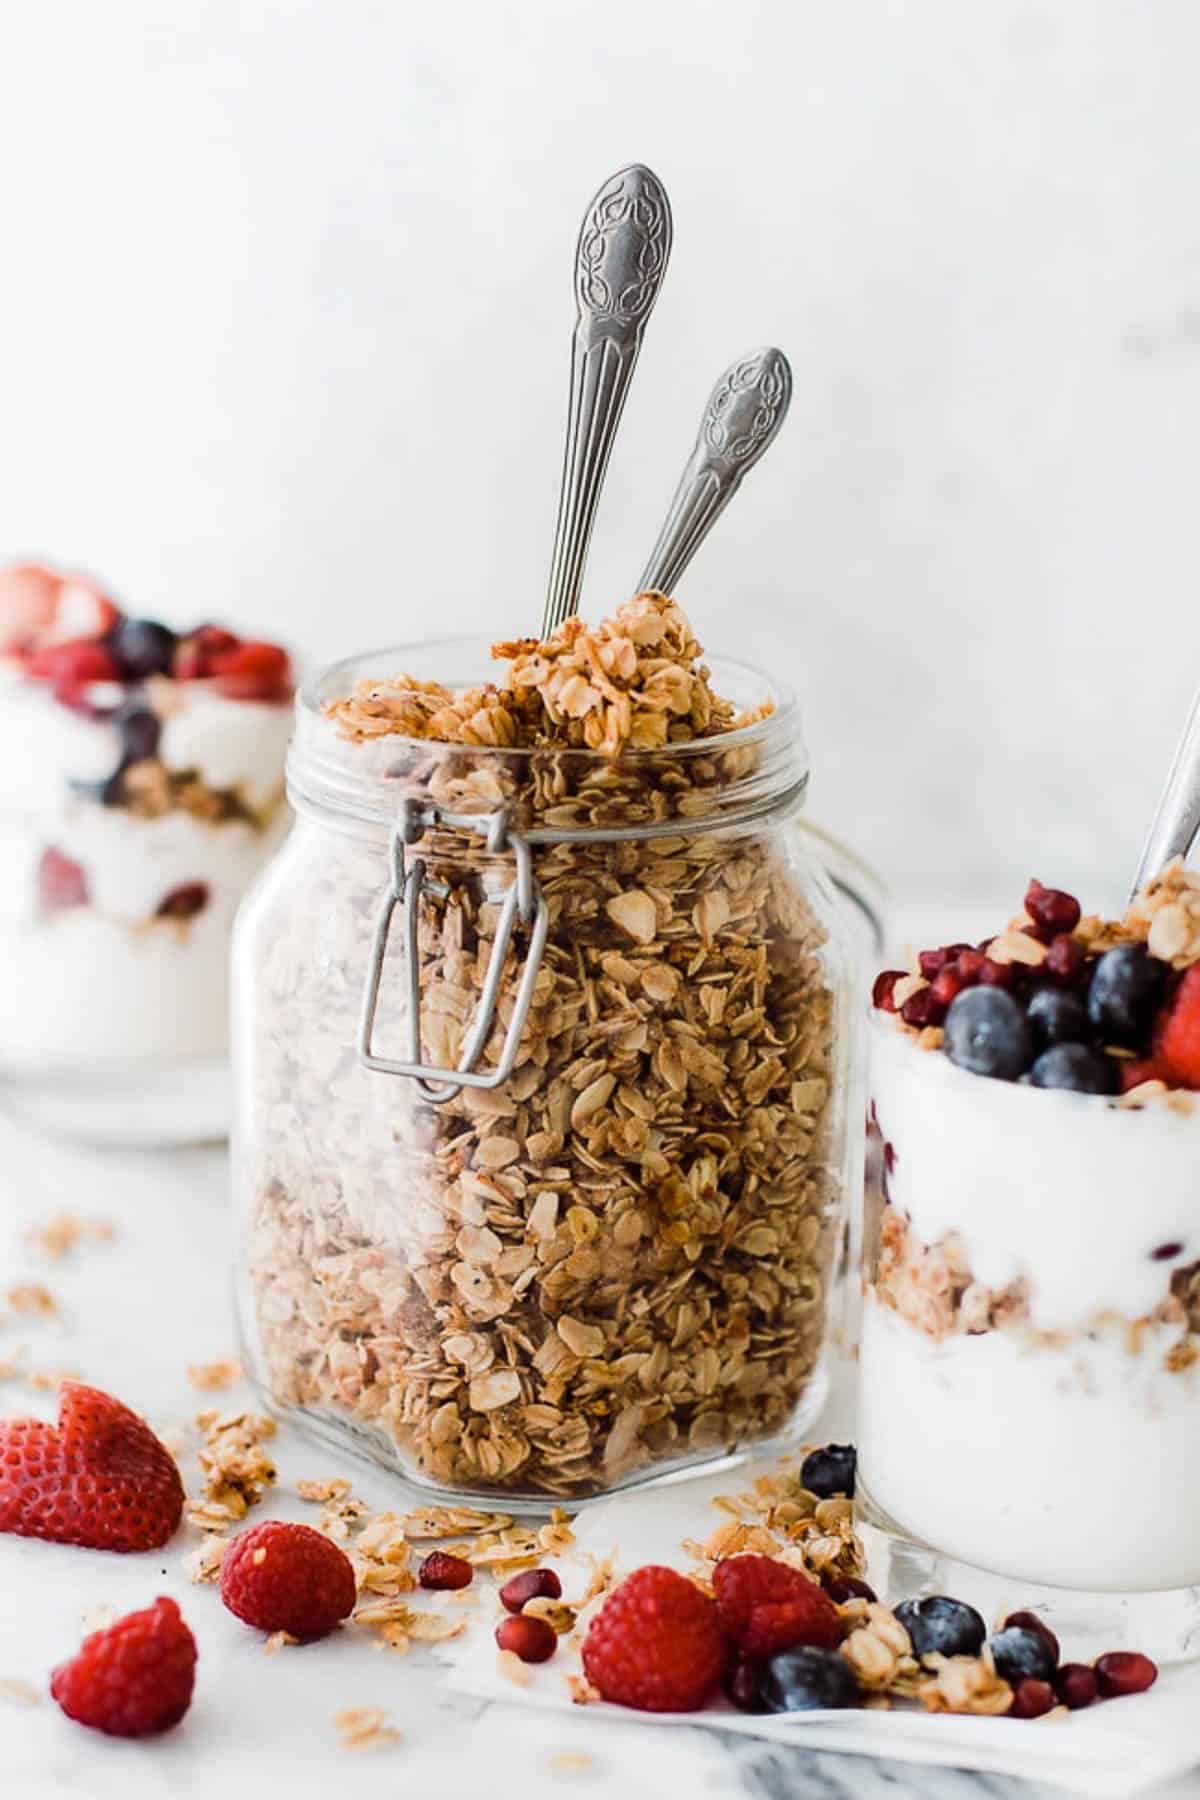 A jar of healthy granola on the table with two spoons in it and yogurt and berries in a glass.